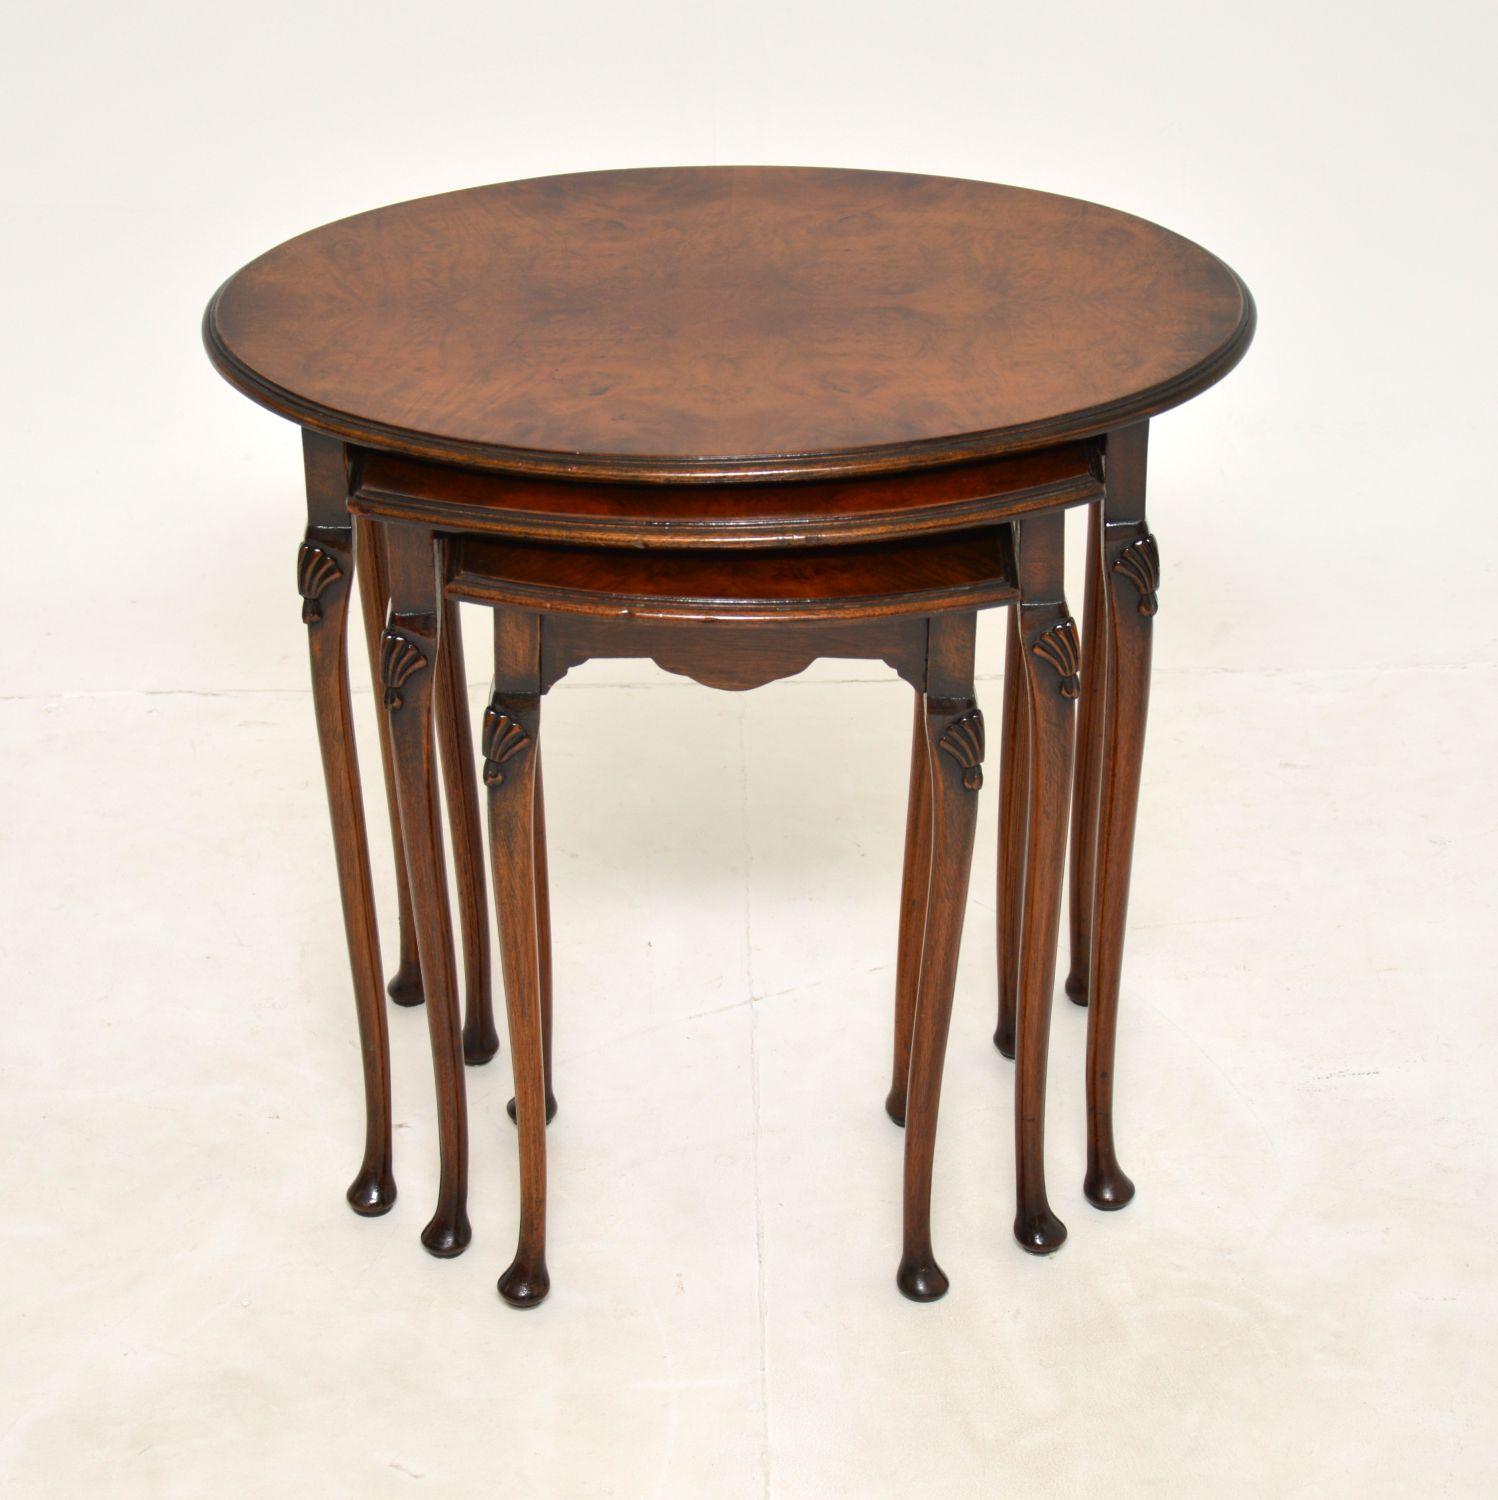 A lovely antique oval nest of three tables in walnut, made in England & dating from around the 1910-1920’s period.

They are beautifully made and are a useful size. The oval tops have stunning burr walnut grain patterns, the legs have well defined